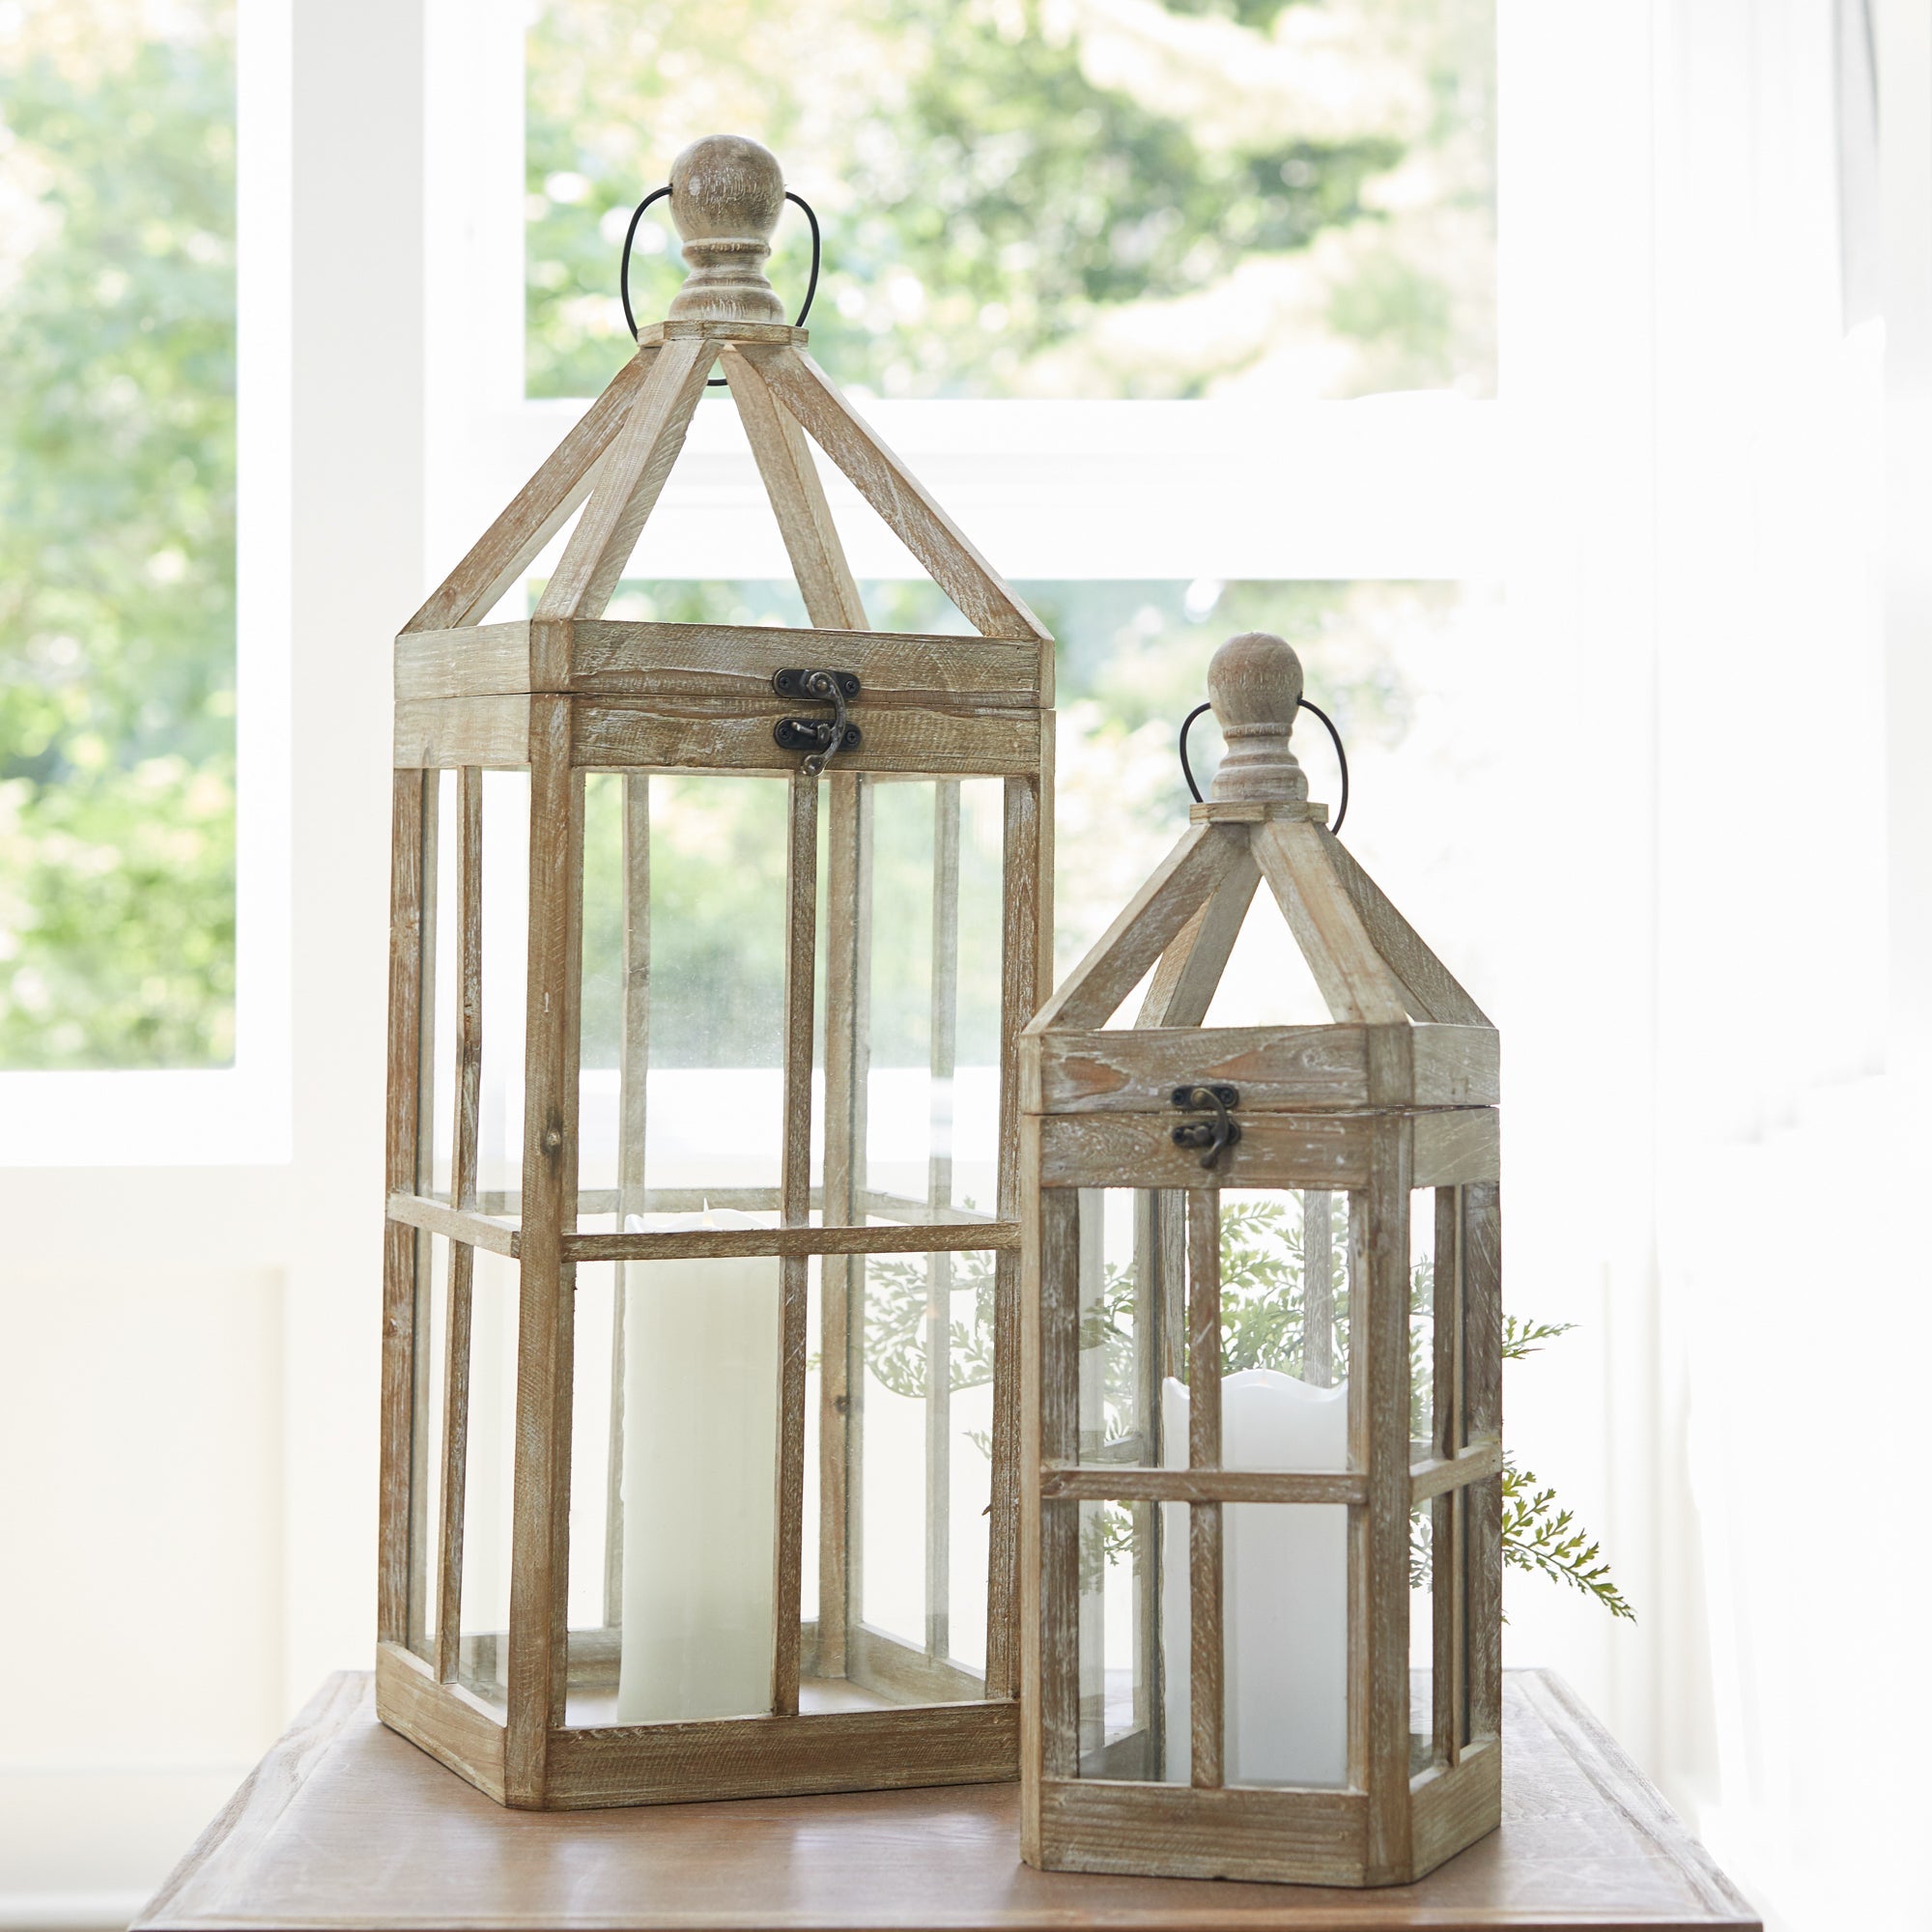 Set of Two Natural and Clear Wood and Glass Floor Lantern Candle Holders - Tuesday Morning-Candle Holders